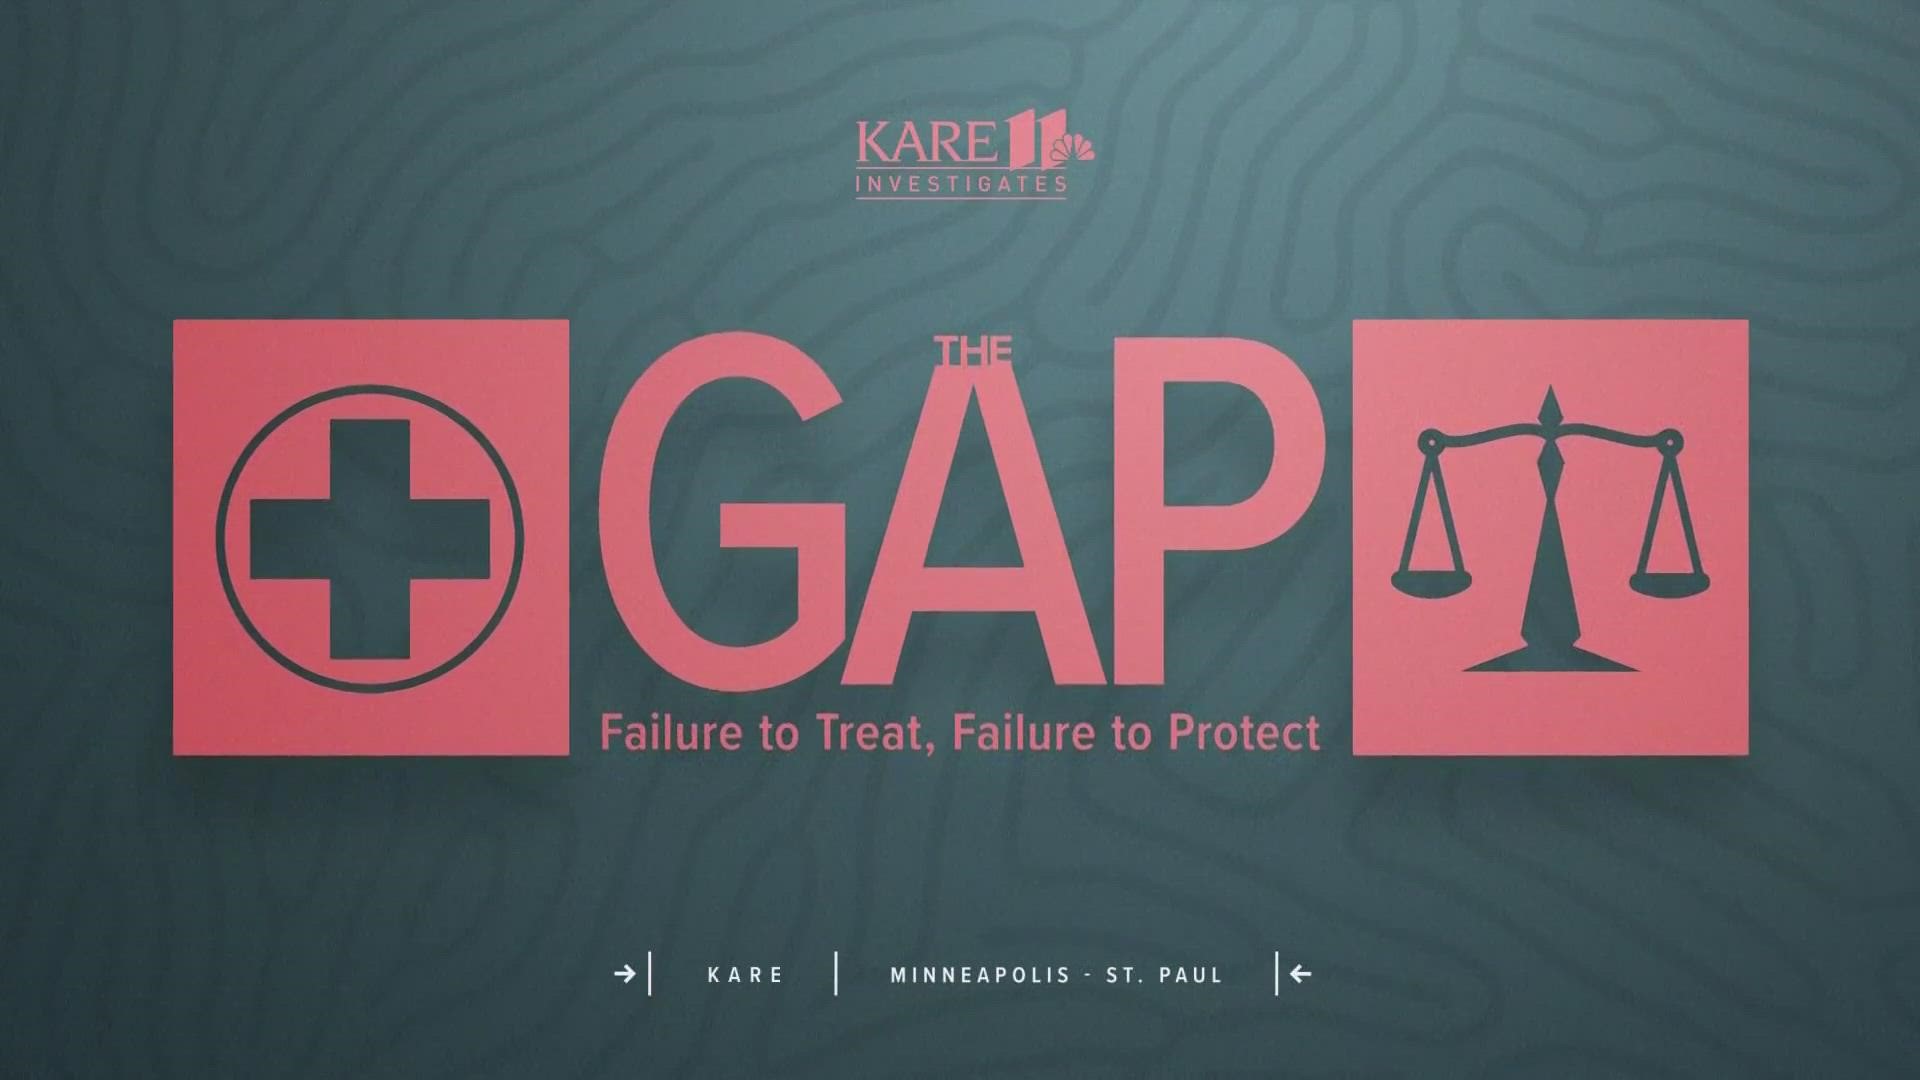 KARE 11’s nationally award-winning investigation sparked sweeping reforms in Minnesota’s mental health and criminal justice systems.